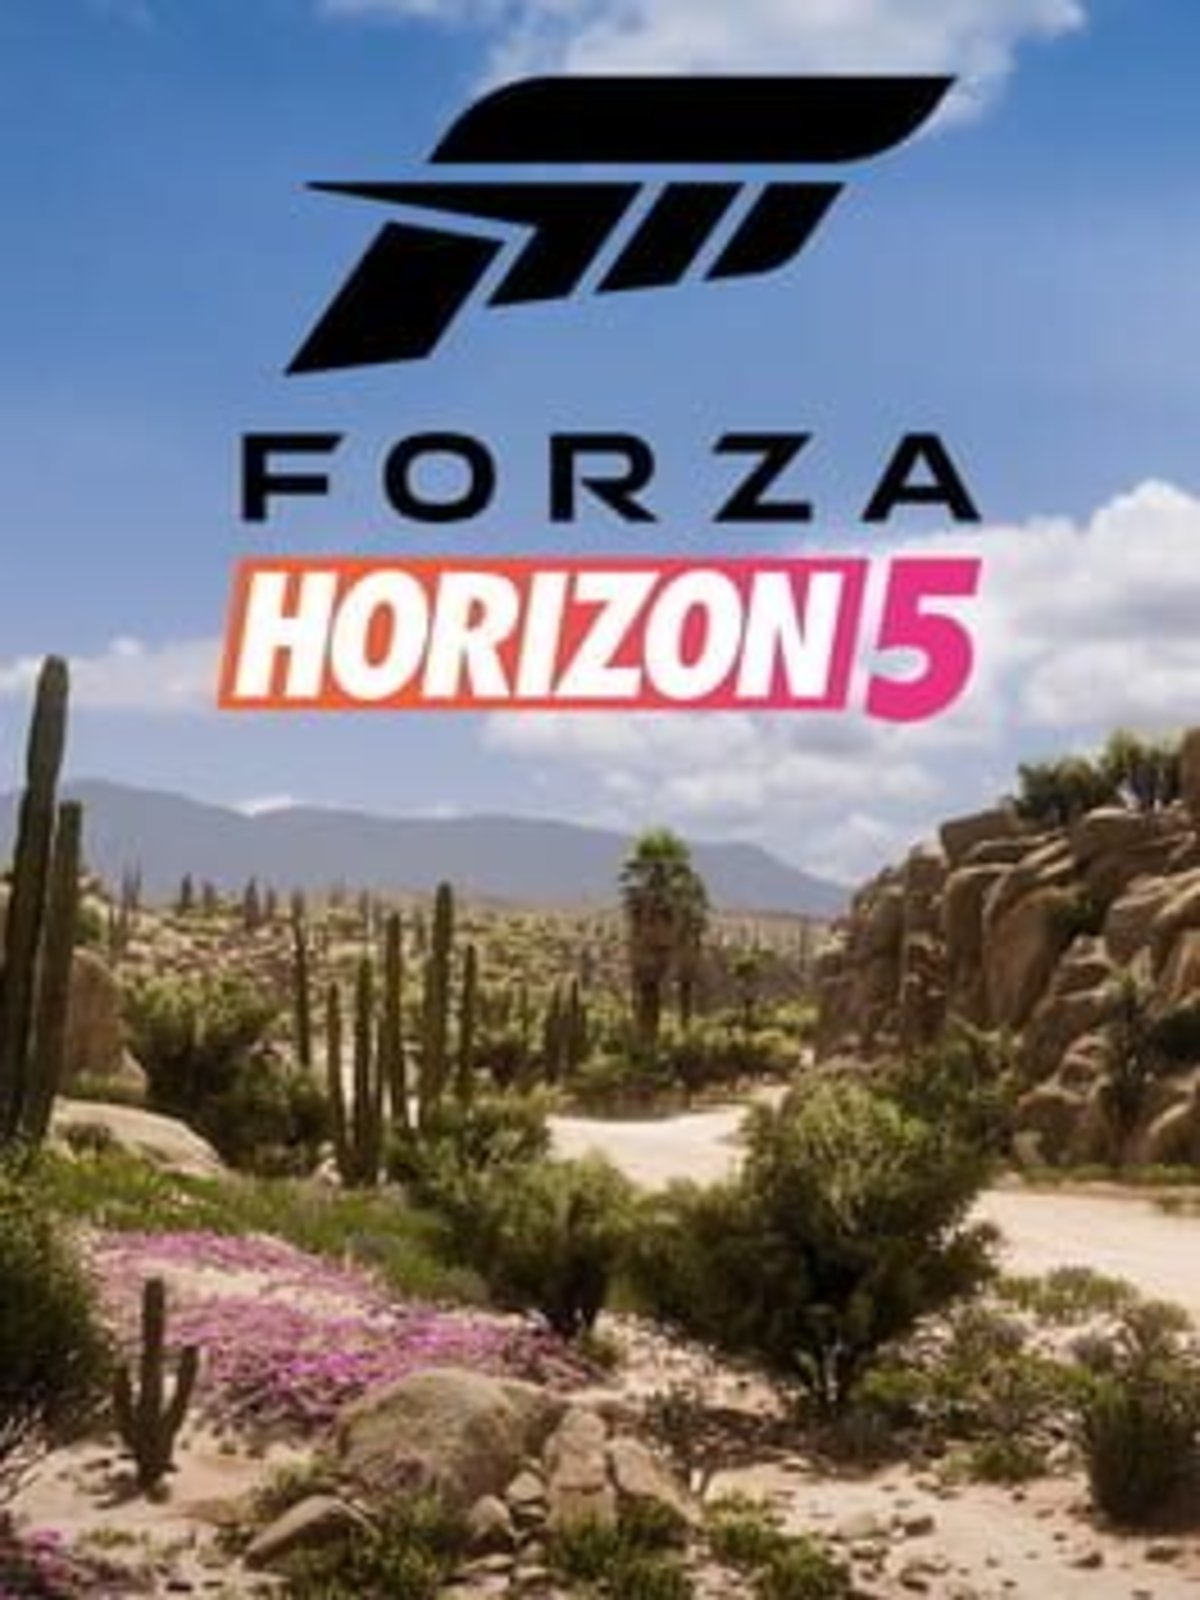 Forza Horizon 5 announces its requirements on PC